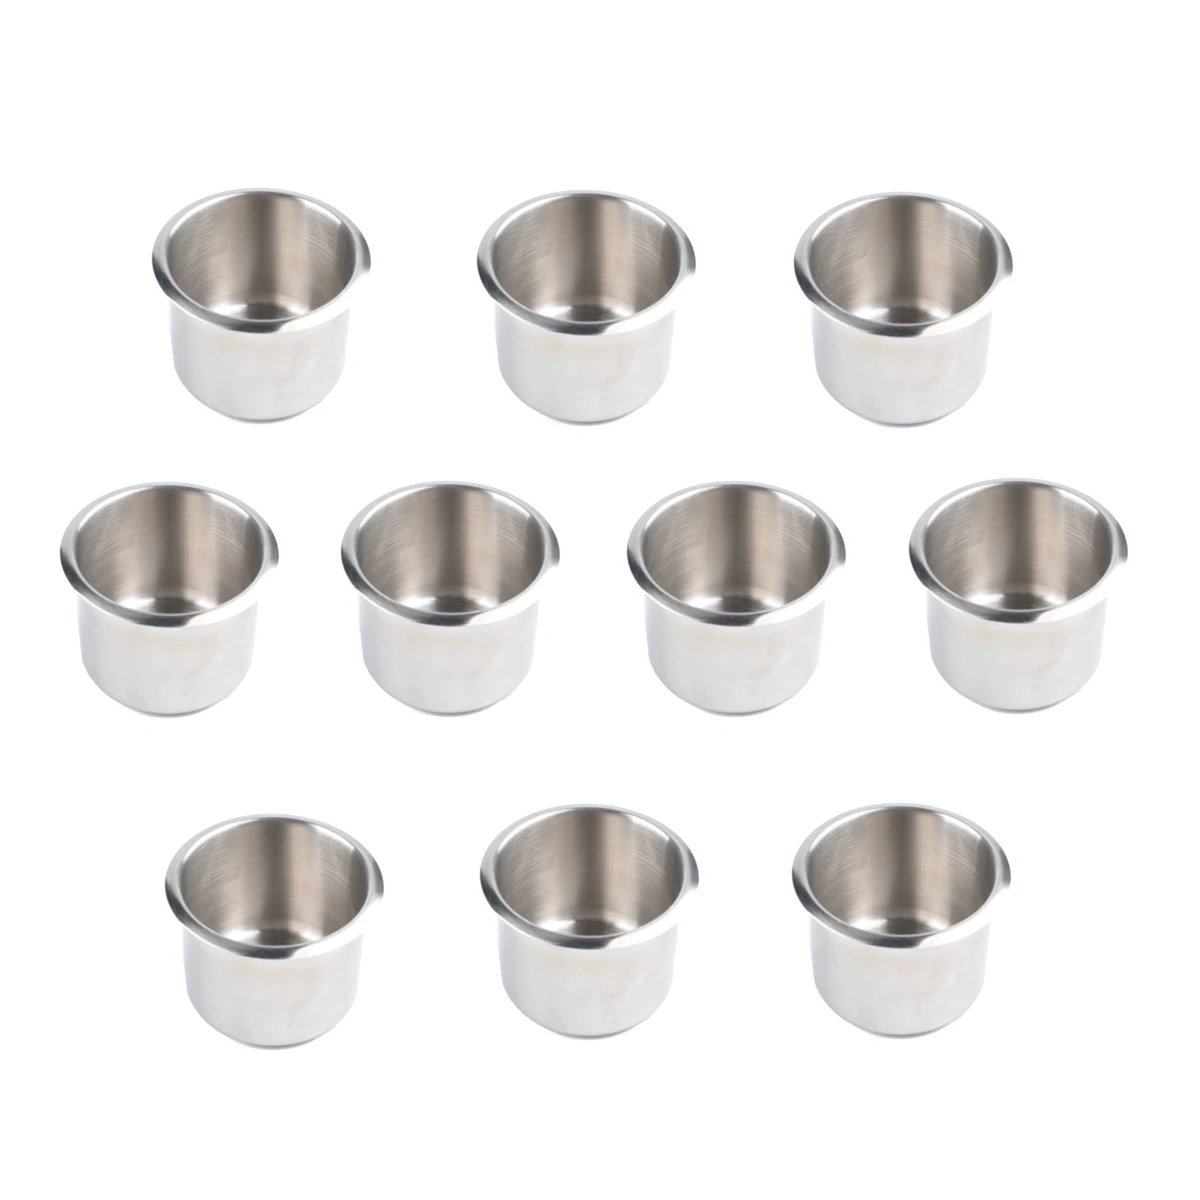 

10 Only Boat Cup Drink Holder Stainless Steel Drop-In Cup Holder,6.8 x 5.5